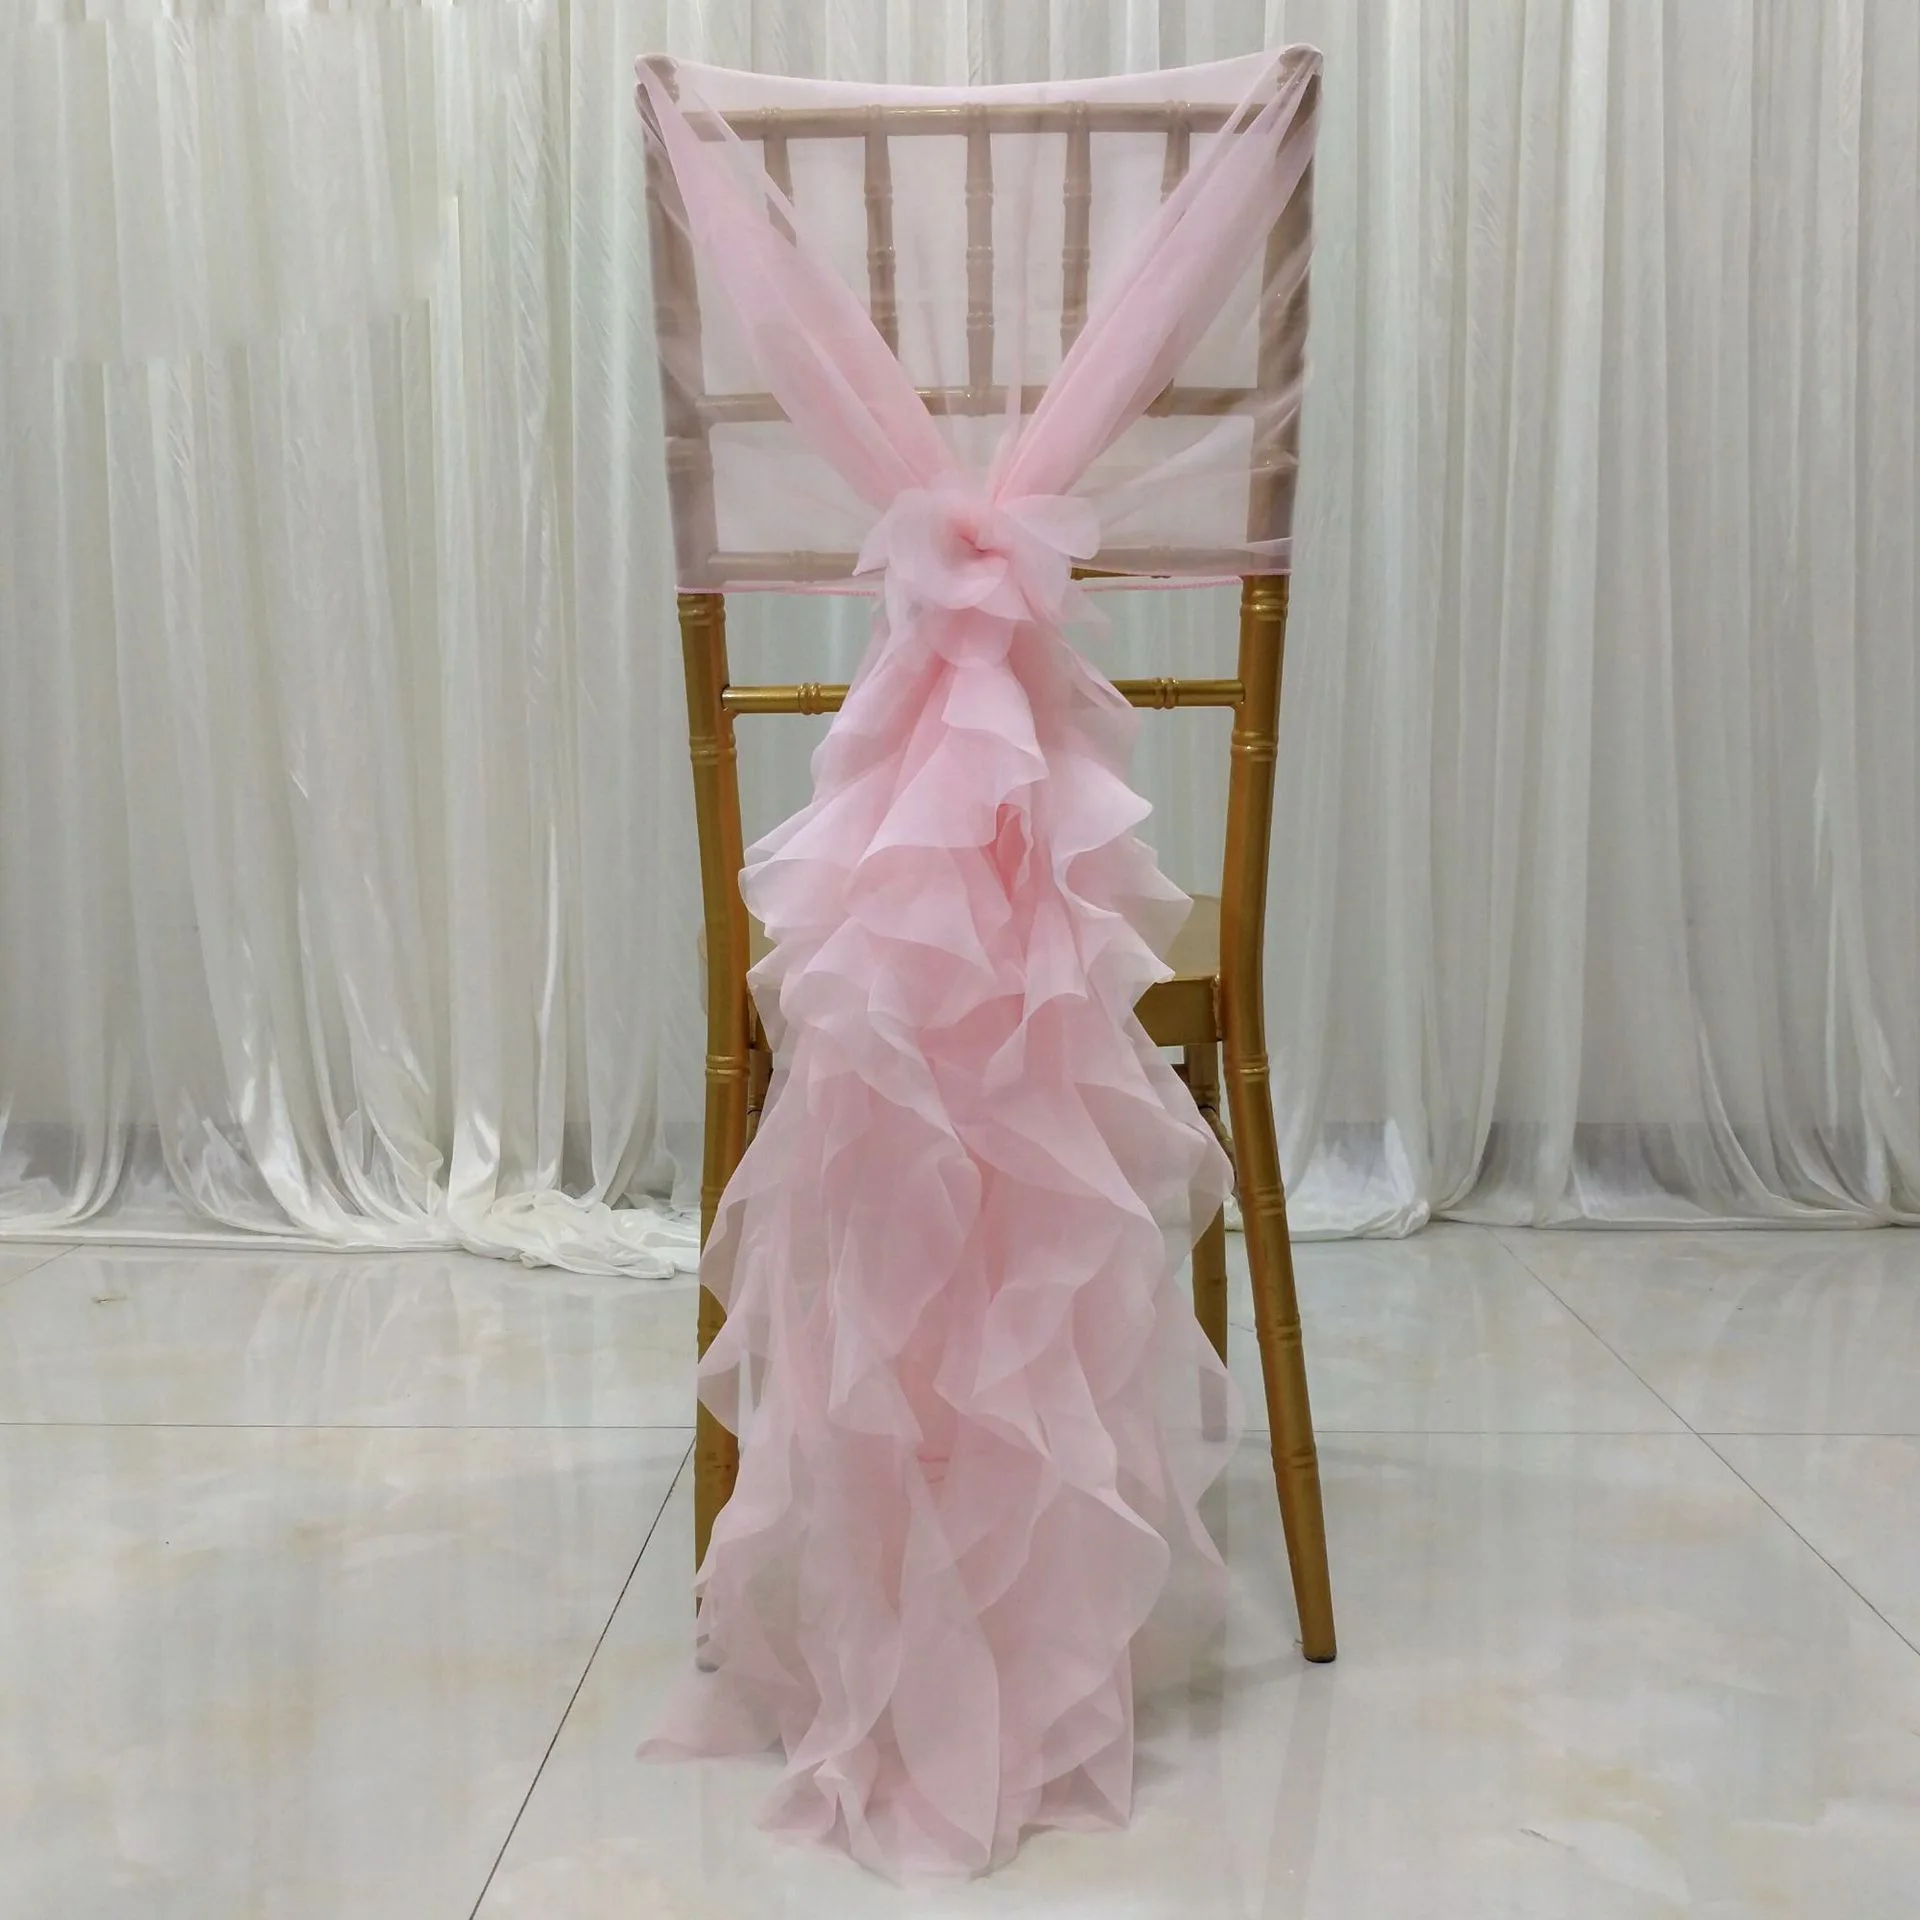 

140x110cm Ruffles Outdoor Chair Sash Bow For Cover Banquet Wedding Party Event Home Decoration Sheer Organza Fabric Romantic